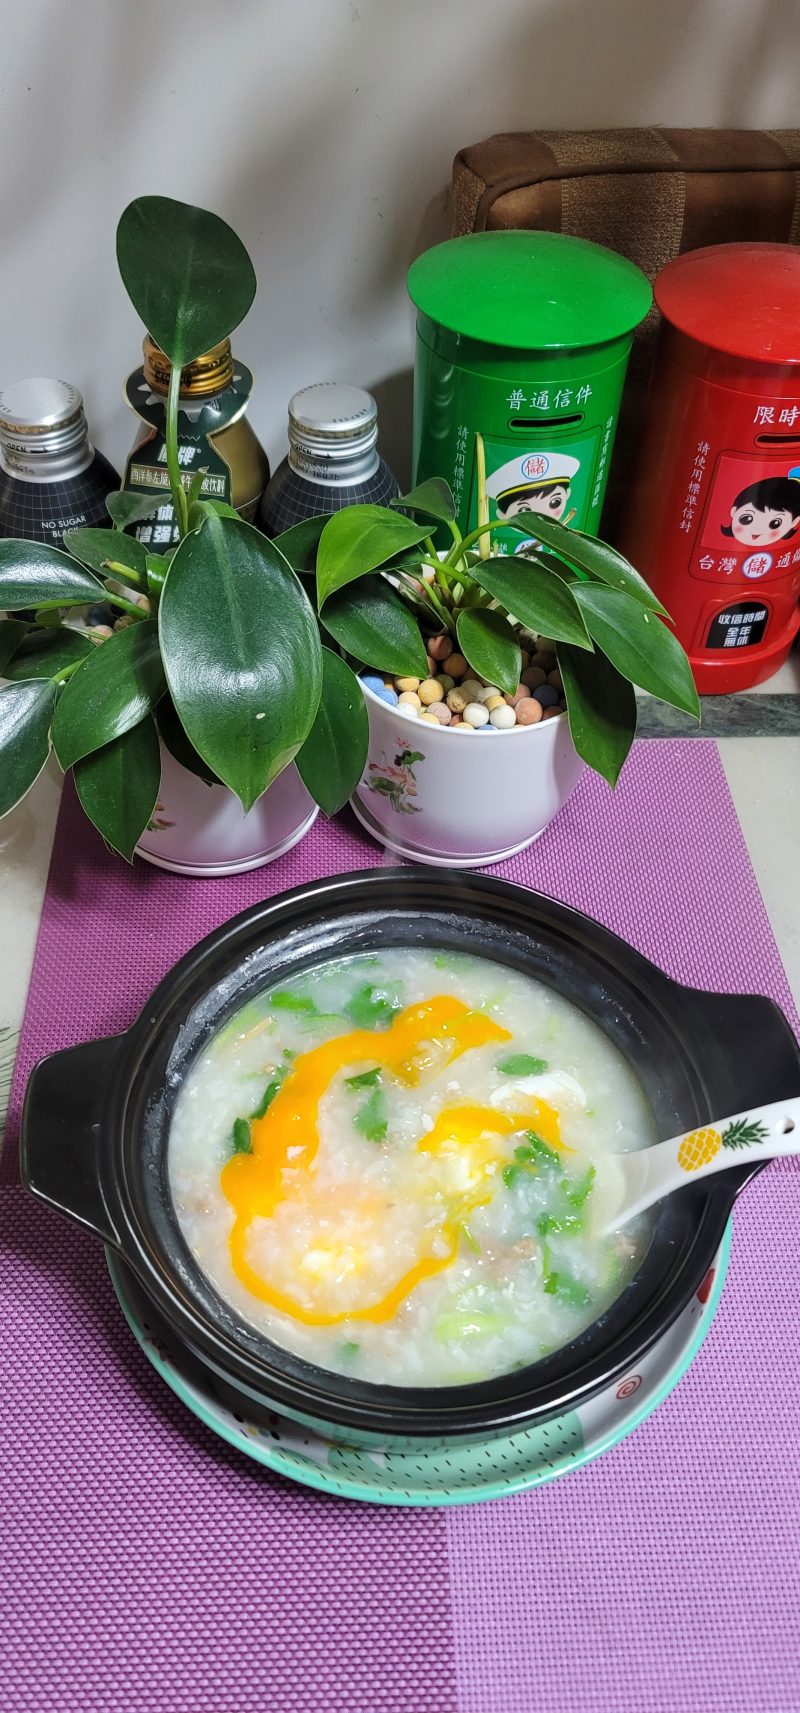 Steps for Making Egg Beef Cilantro Congee